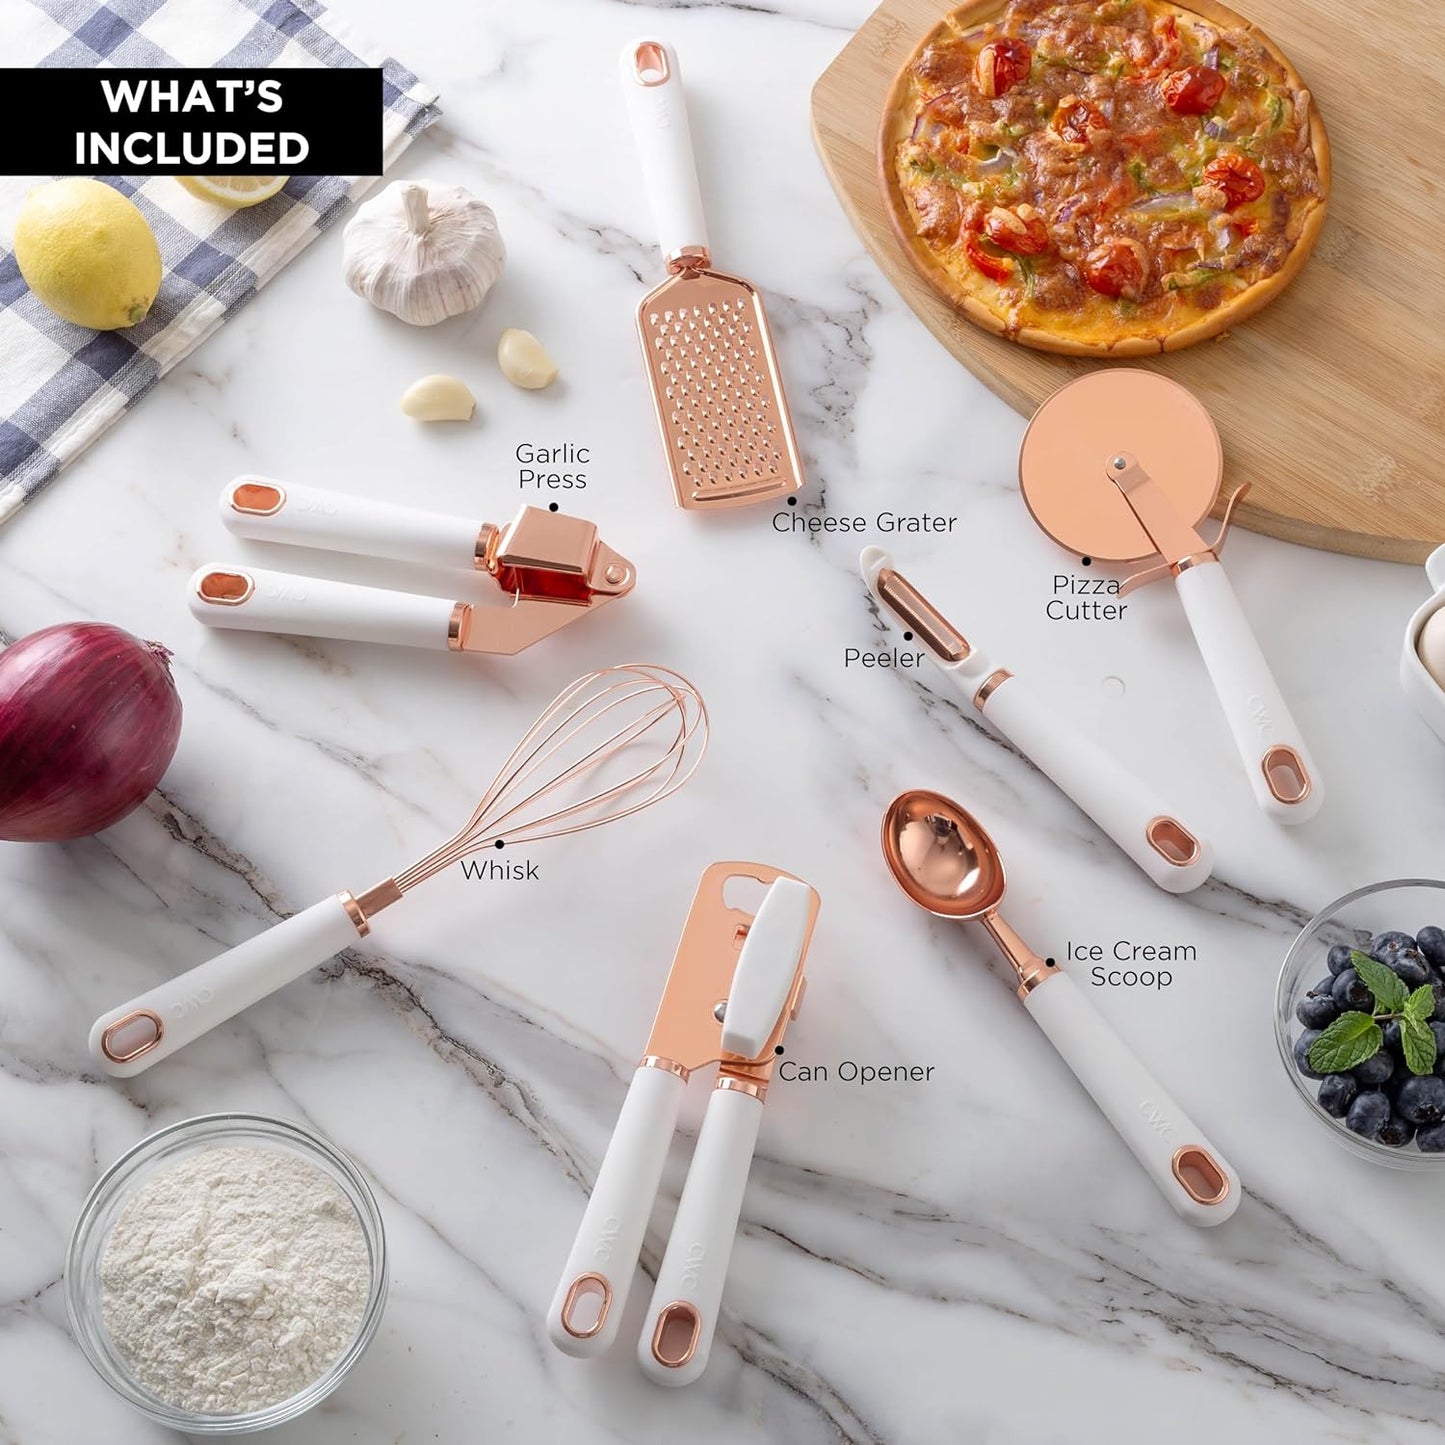 7 Pc Kitchen Gadget Set Copper Coated Stainless Steel Utensils with Soft Touch White Handles